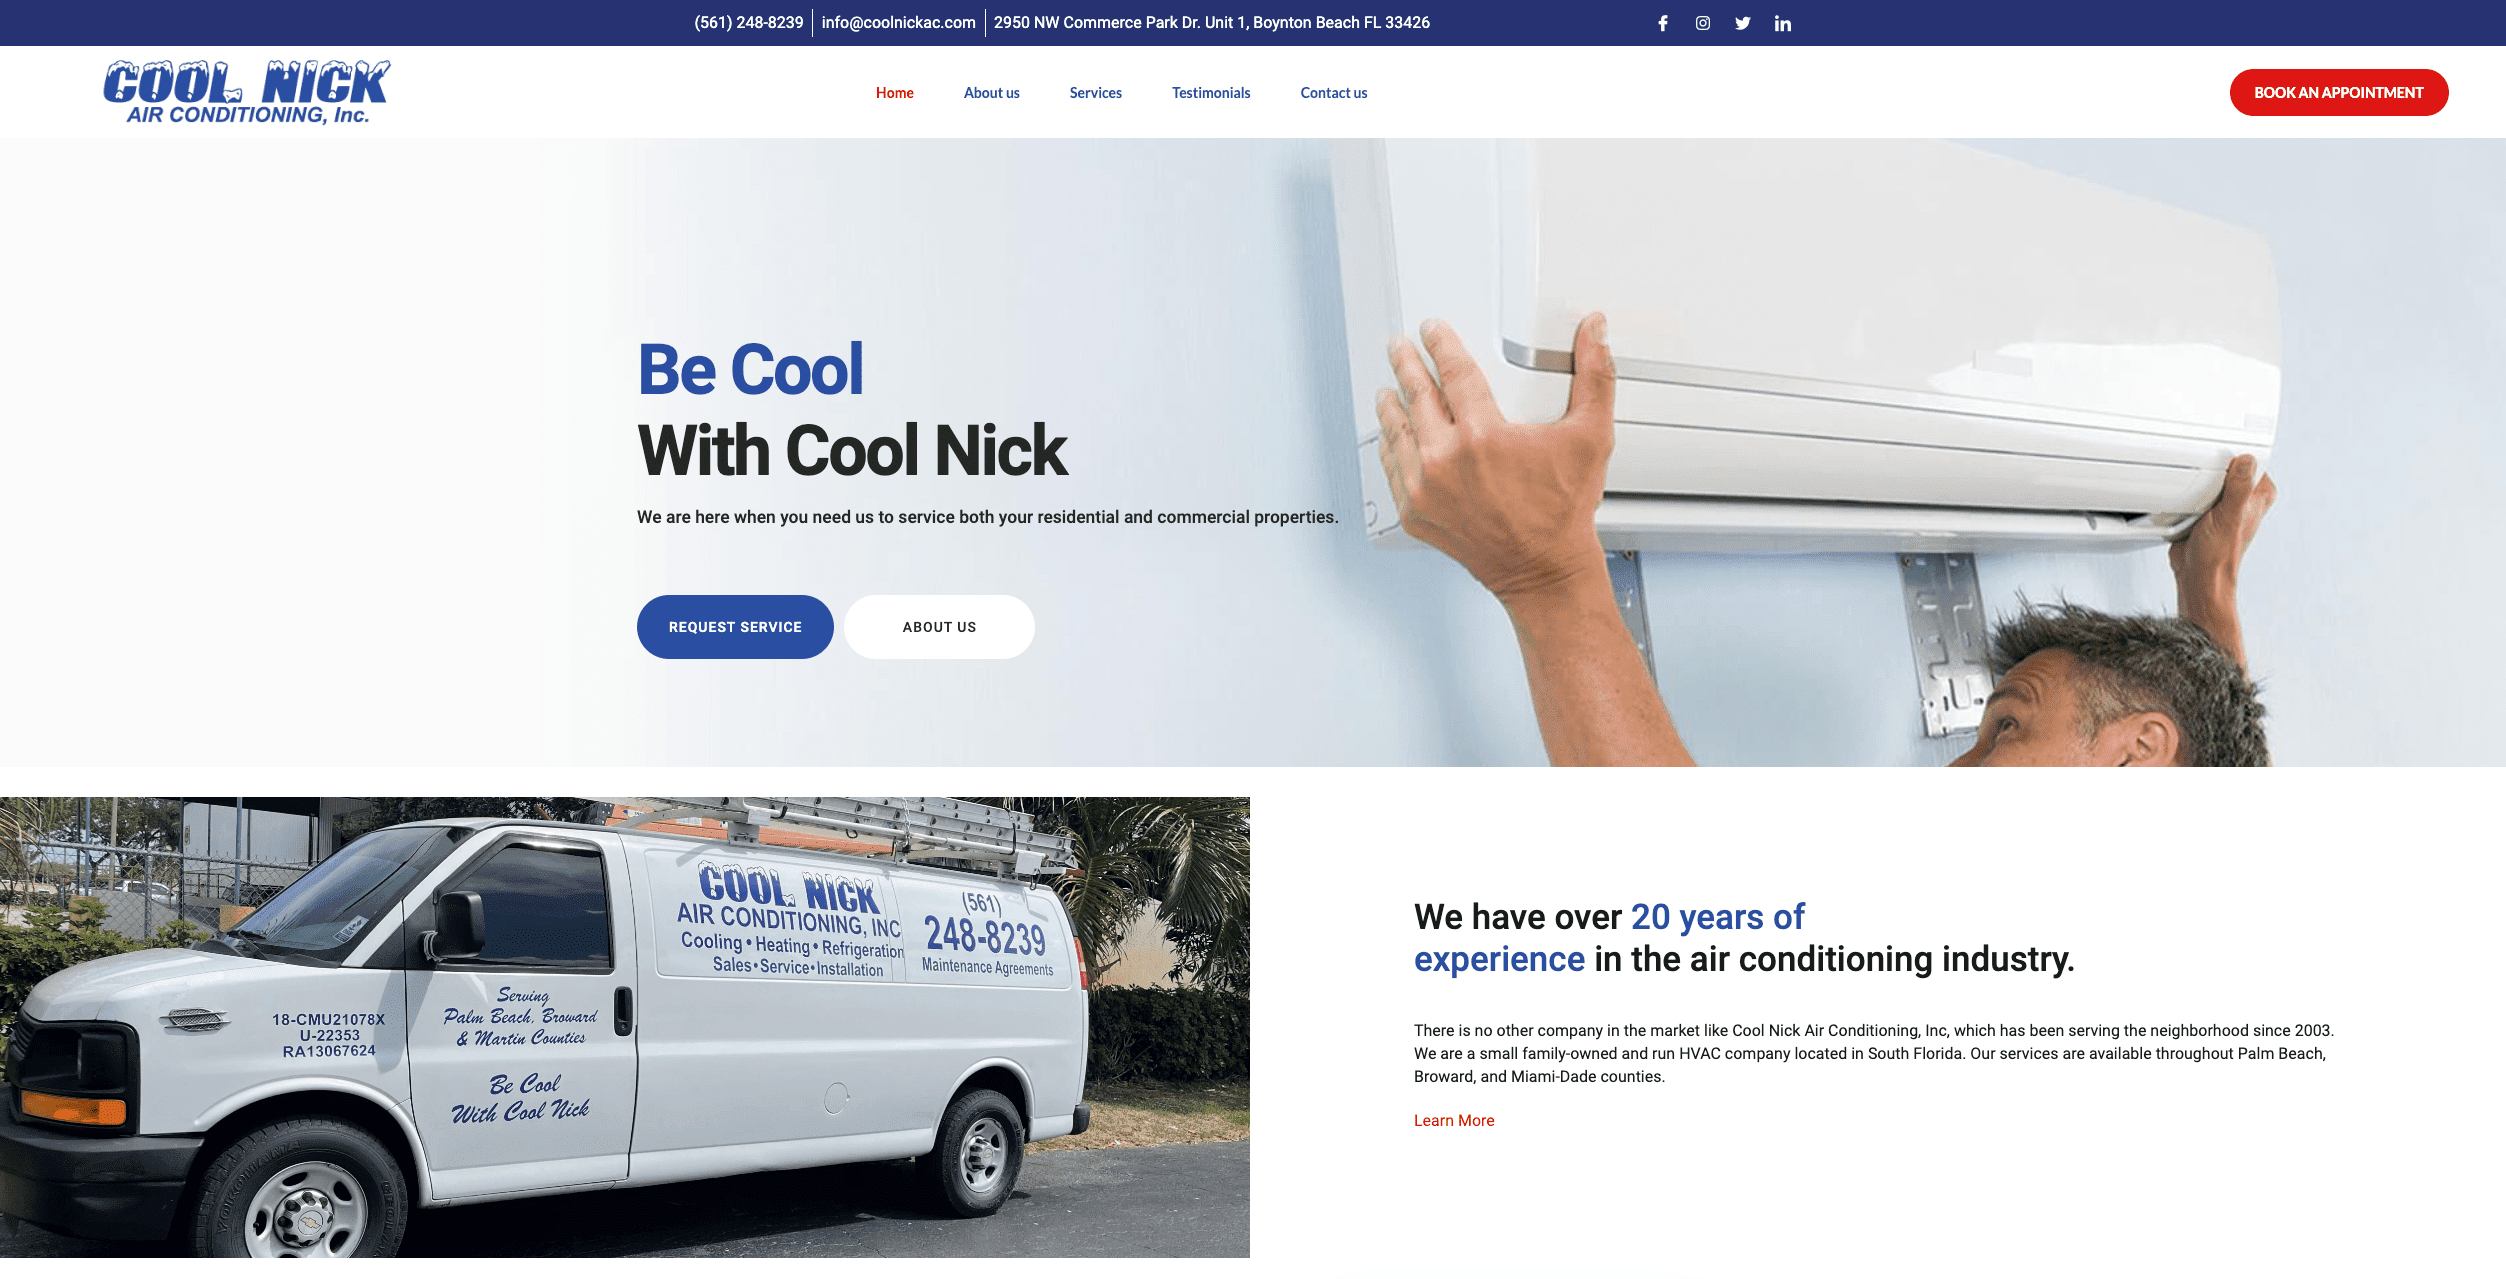 **Cool Nick's HVAC**

*Your Comfort, Our Mission*

**Over 20 Years of Industry Experience**

![Worker installing AC unit]   
![Service van]

At Cool Nick's, we bring over two decades of expertise to every job. Whether it's installing an AC unit or servicing your HVAC system, you can trust our seasoned professionals for top-notch service.

**Contact Us Today!**
**(555) 123-4567 | info@coolnickshvac.com**

Stay Cool with Cool Nick’s!